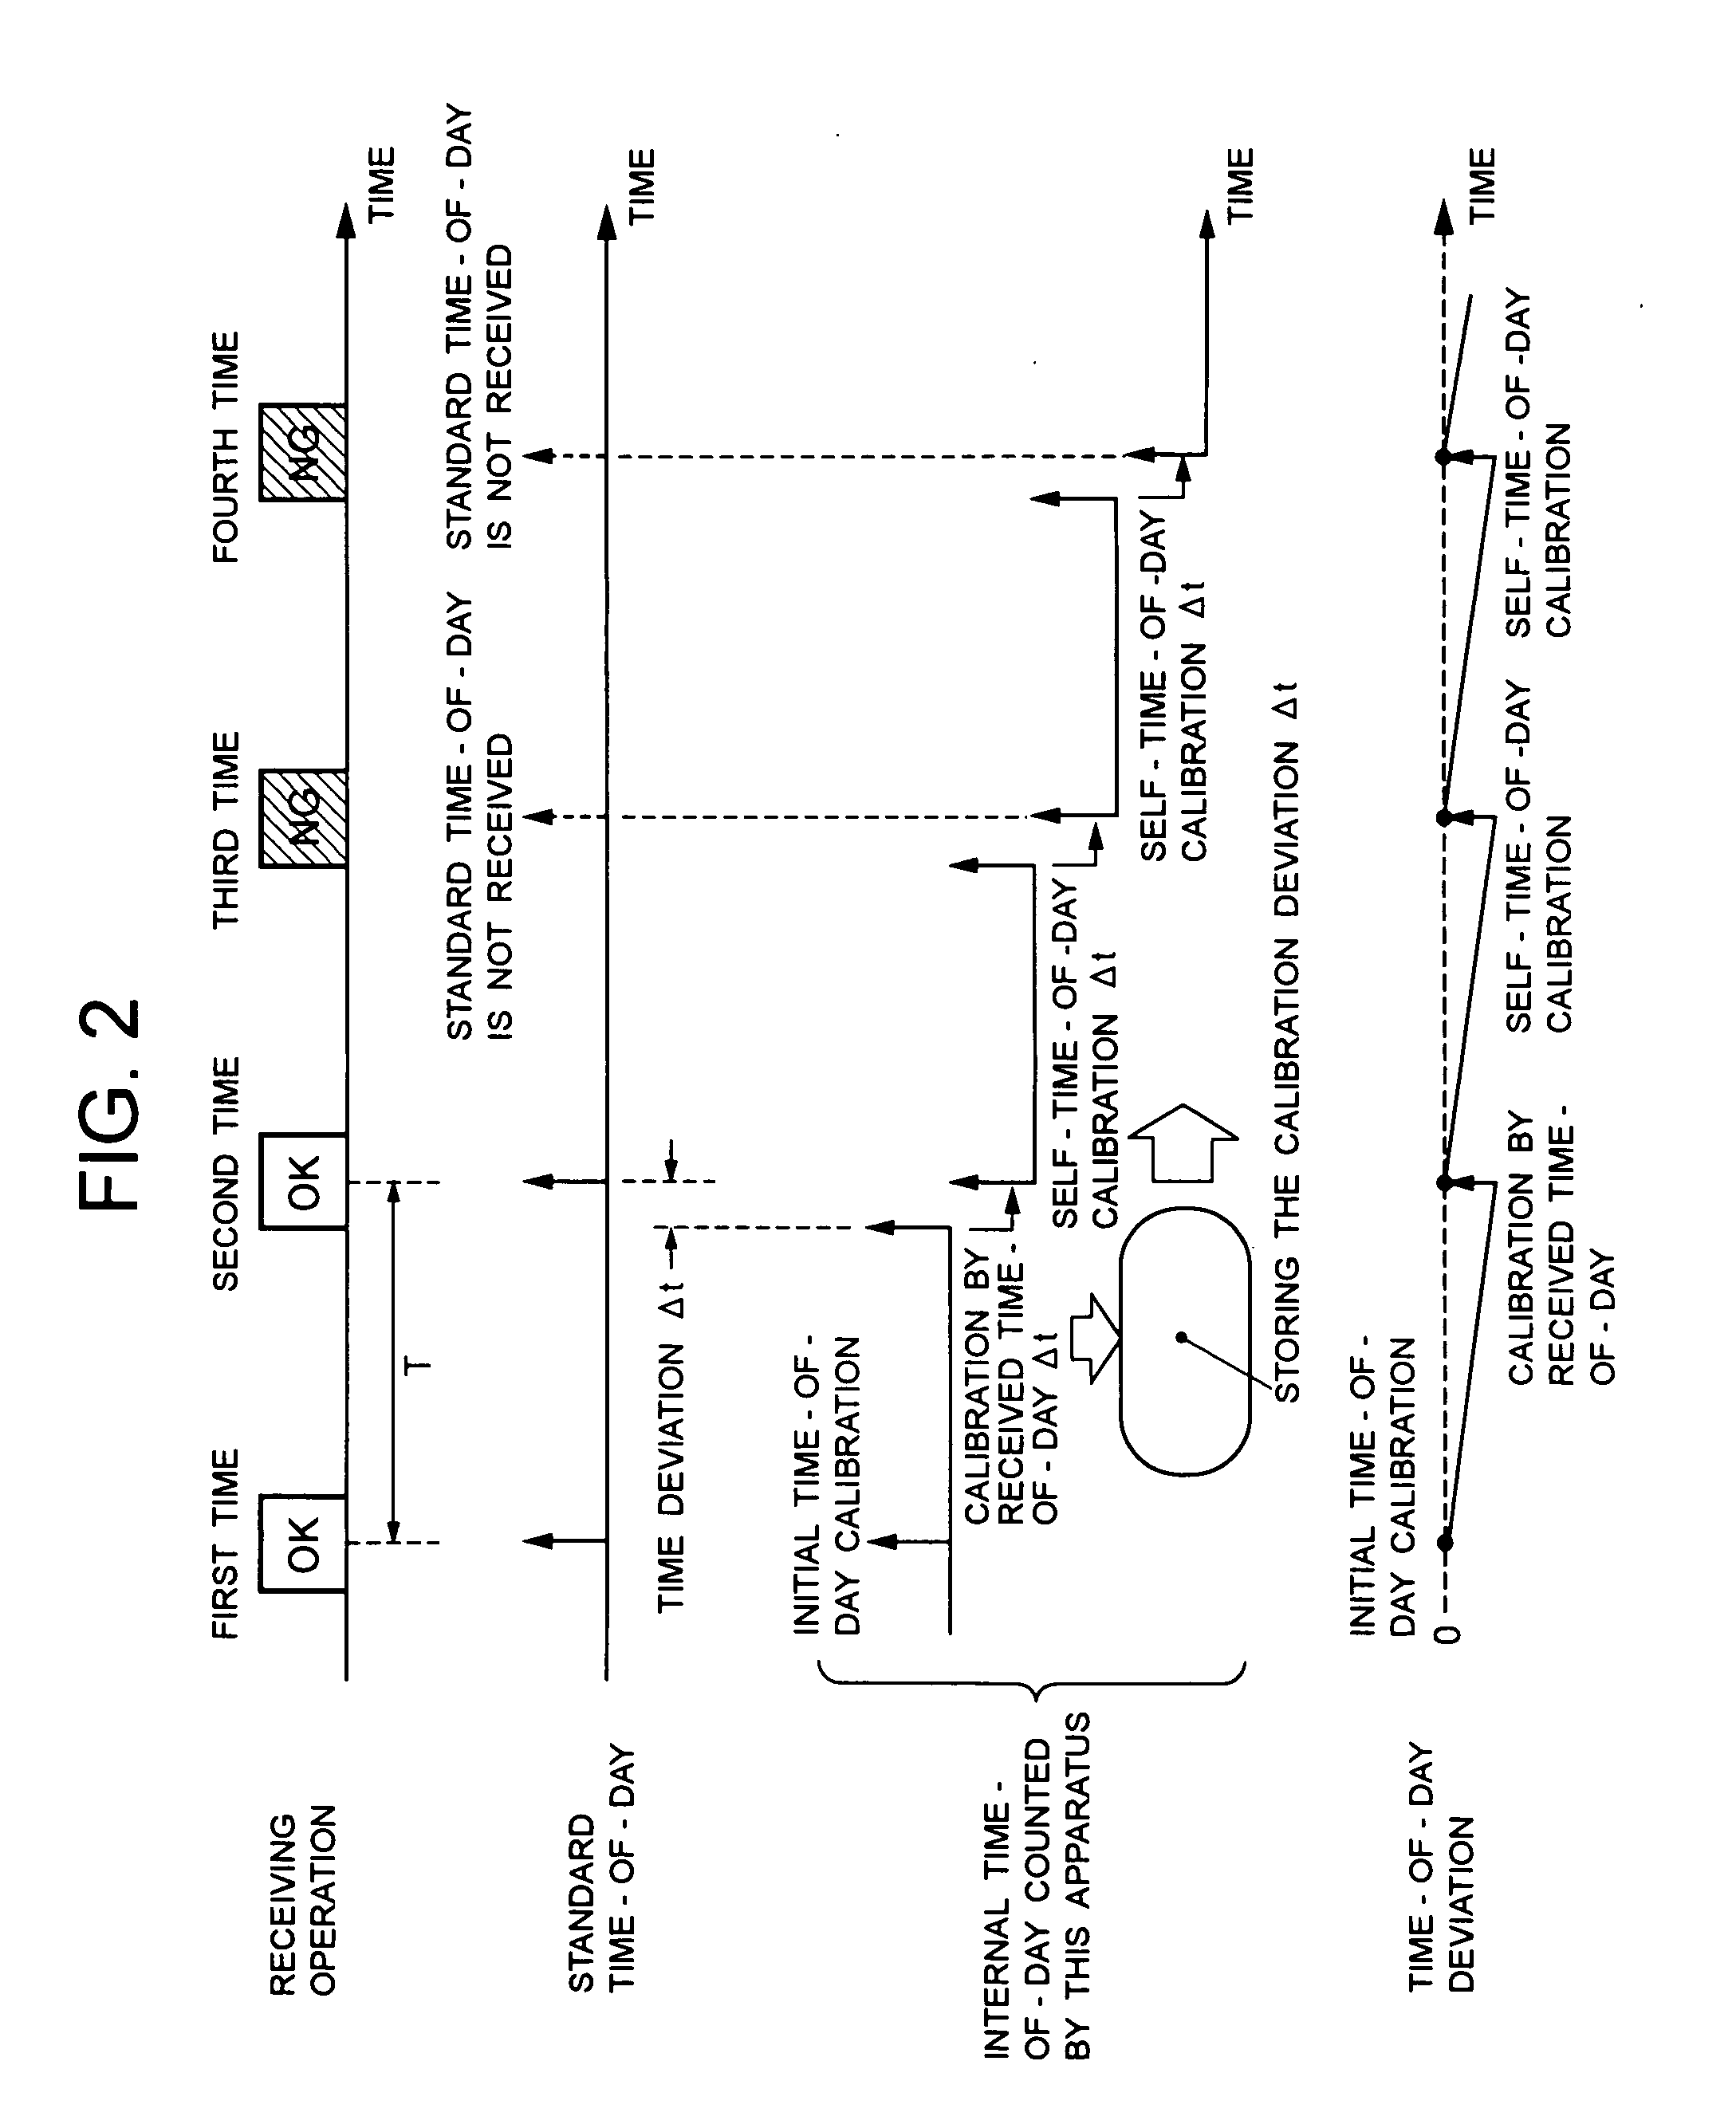 Time-of-day apparatus receiving standard time code broadcast